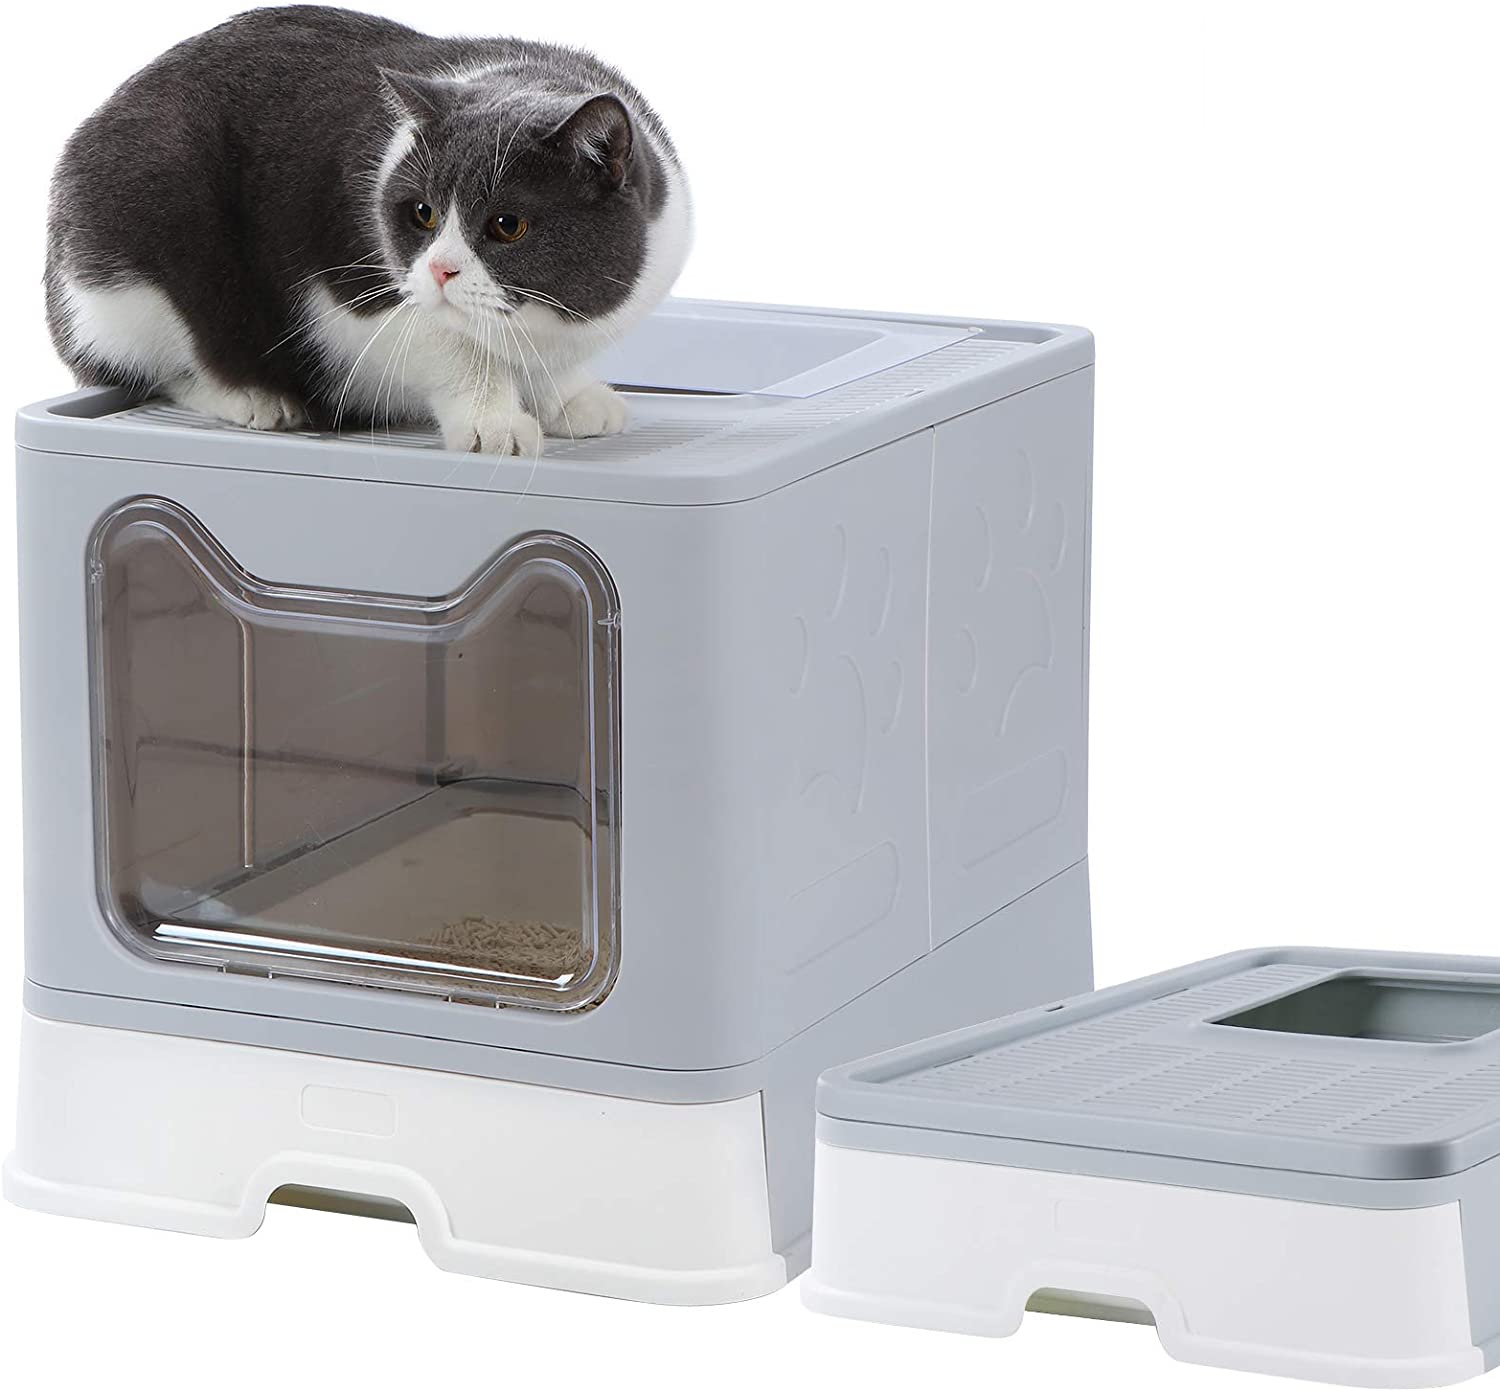 Dymoll Large Cat Litter Box, Foldable Top Entry Litter Box with Lid ...